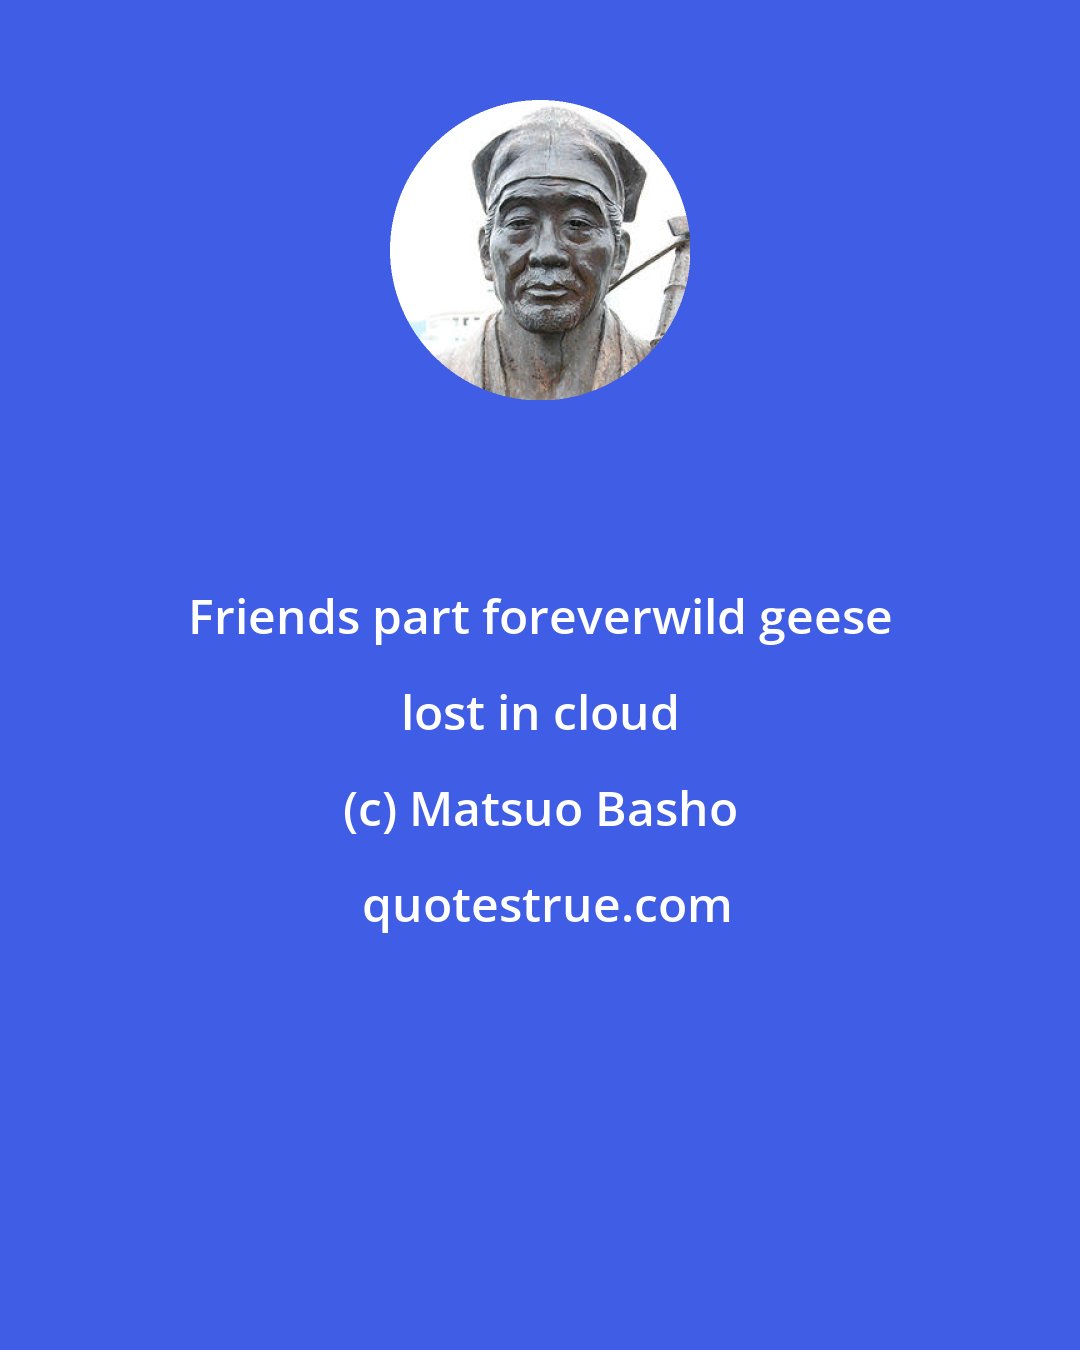 Matsuo Basho: Friends part foreverwild geese lost in cloud